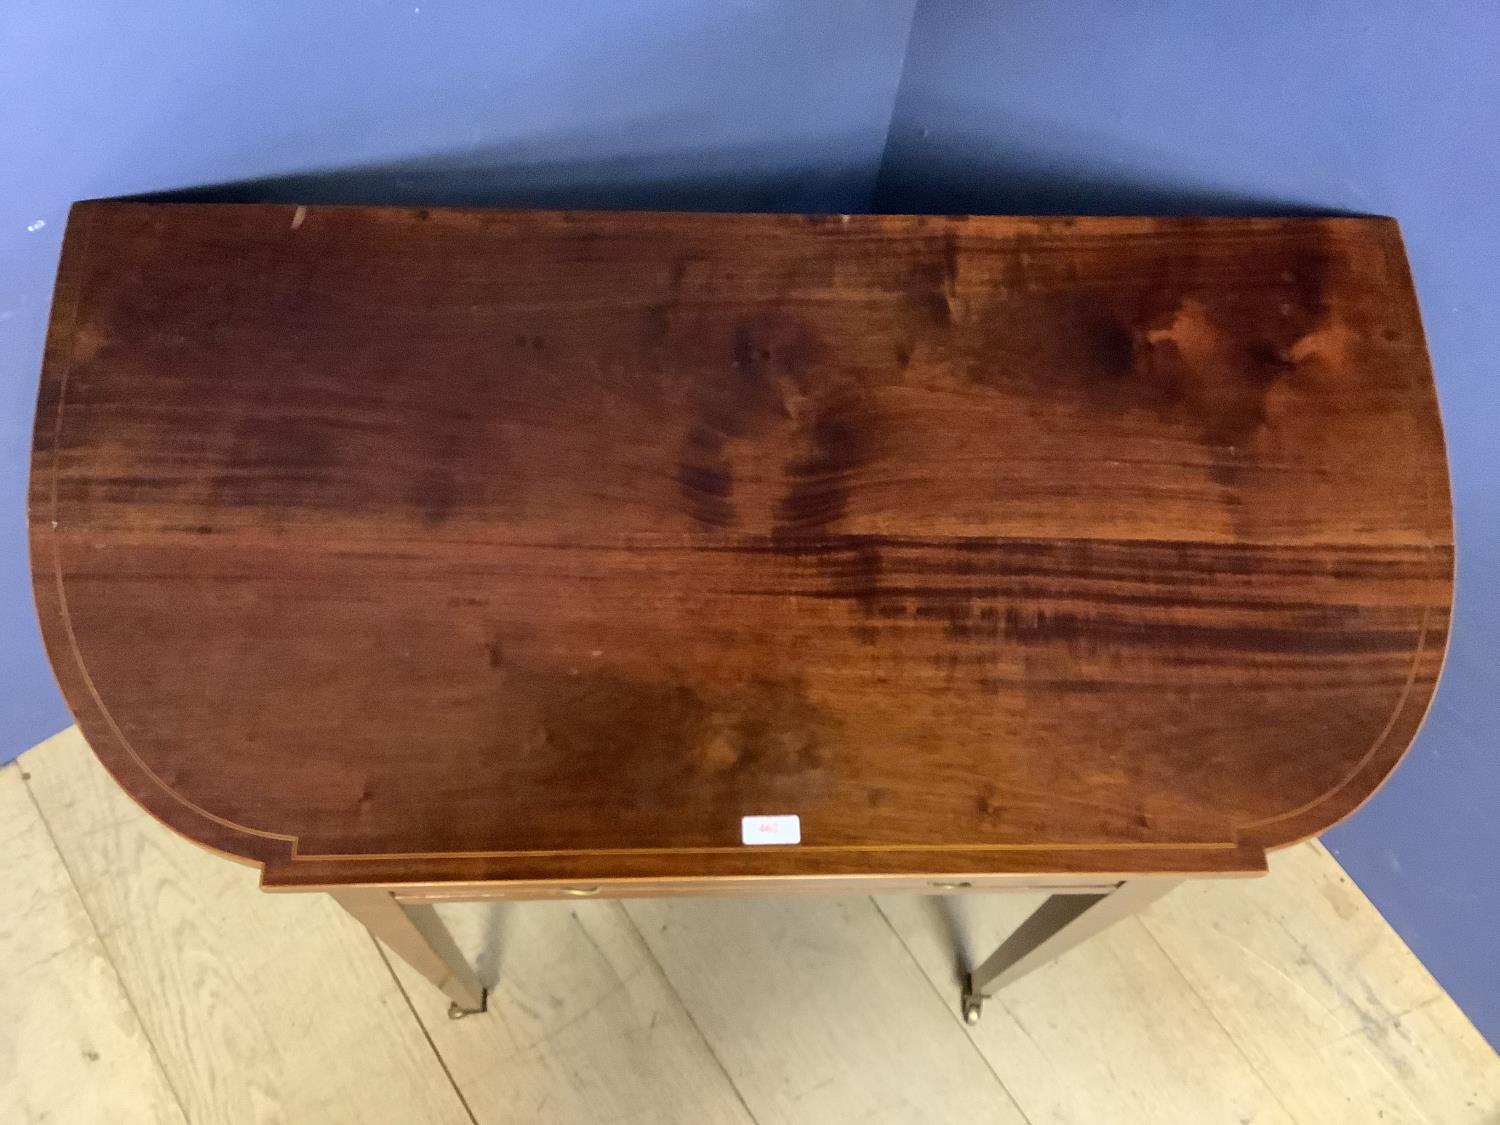 Inlaid mahogany side table with single drawer, 76h x 106w x 53d cm. - Image 3 of 3